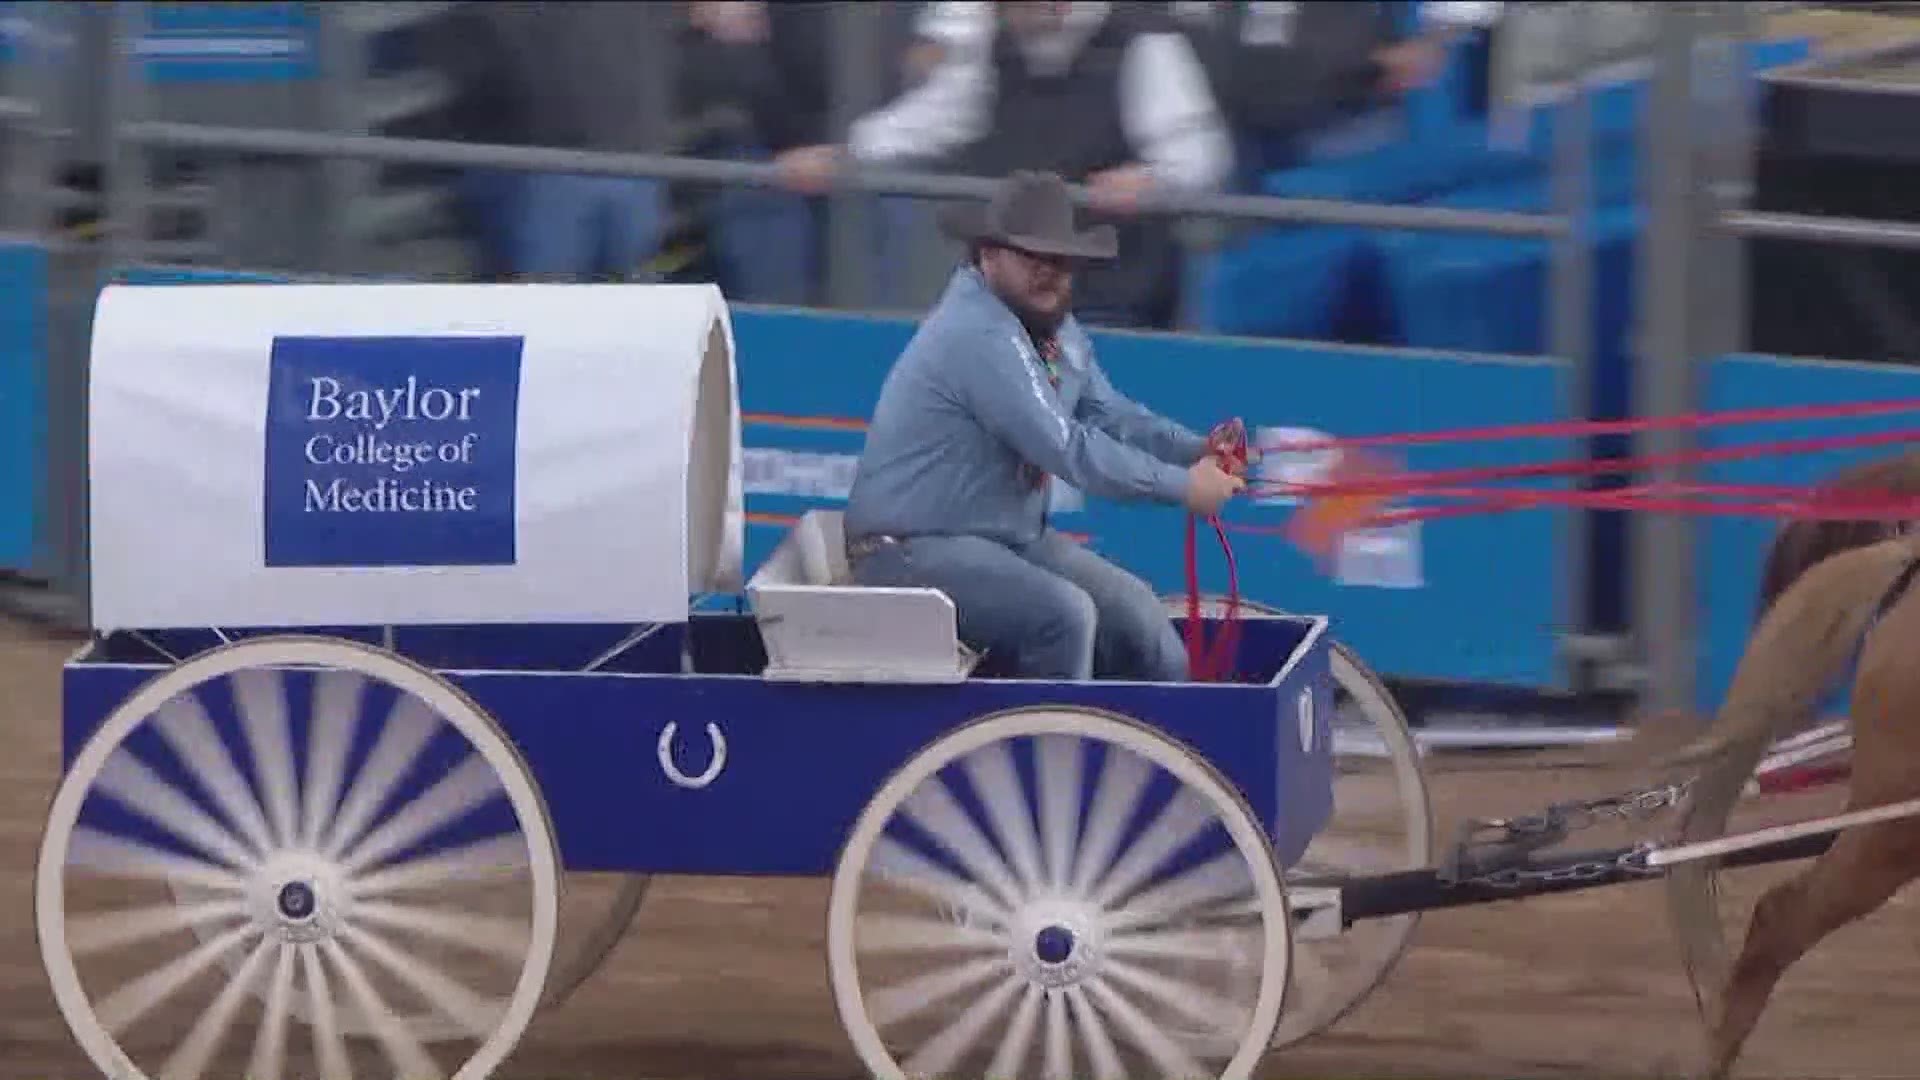 Chuck wagon races at RodeoHouston on March 2019